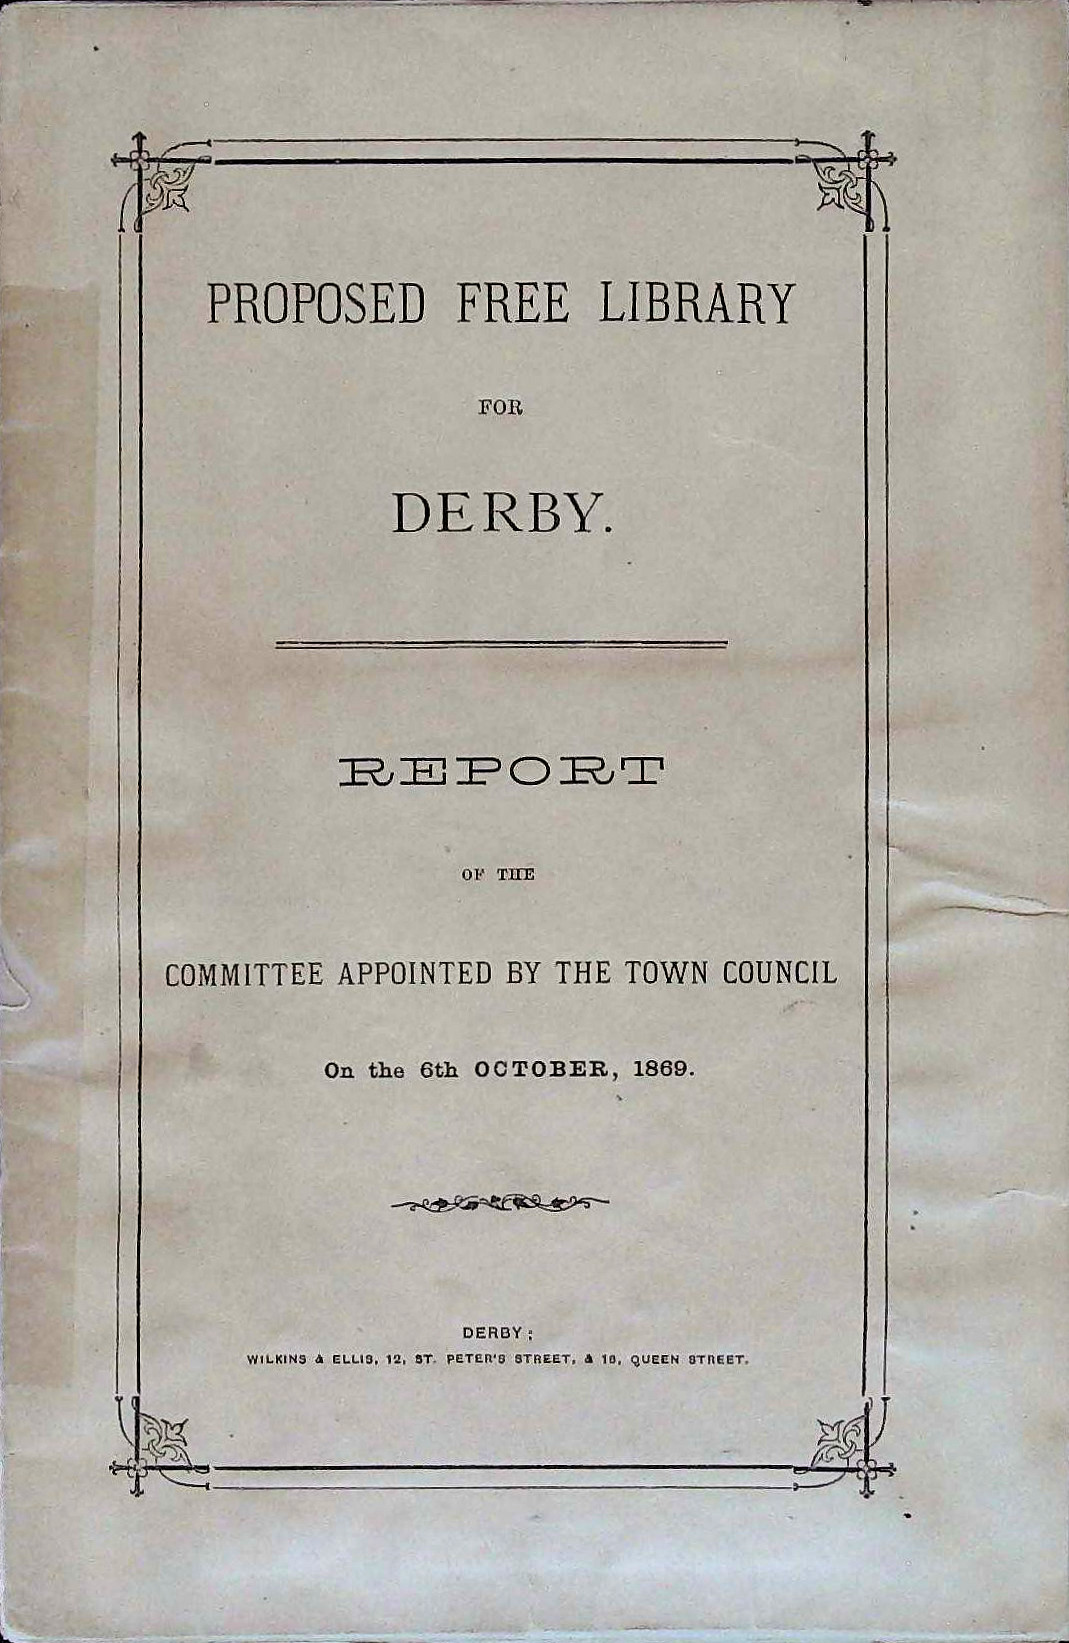 report papers of the free library proposal in 1869